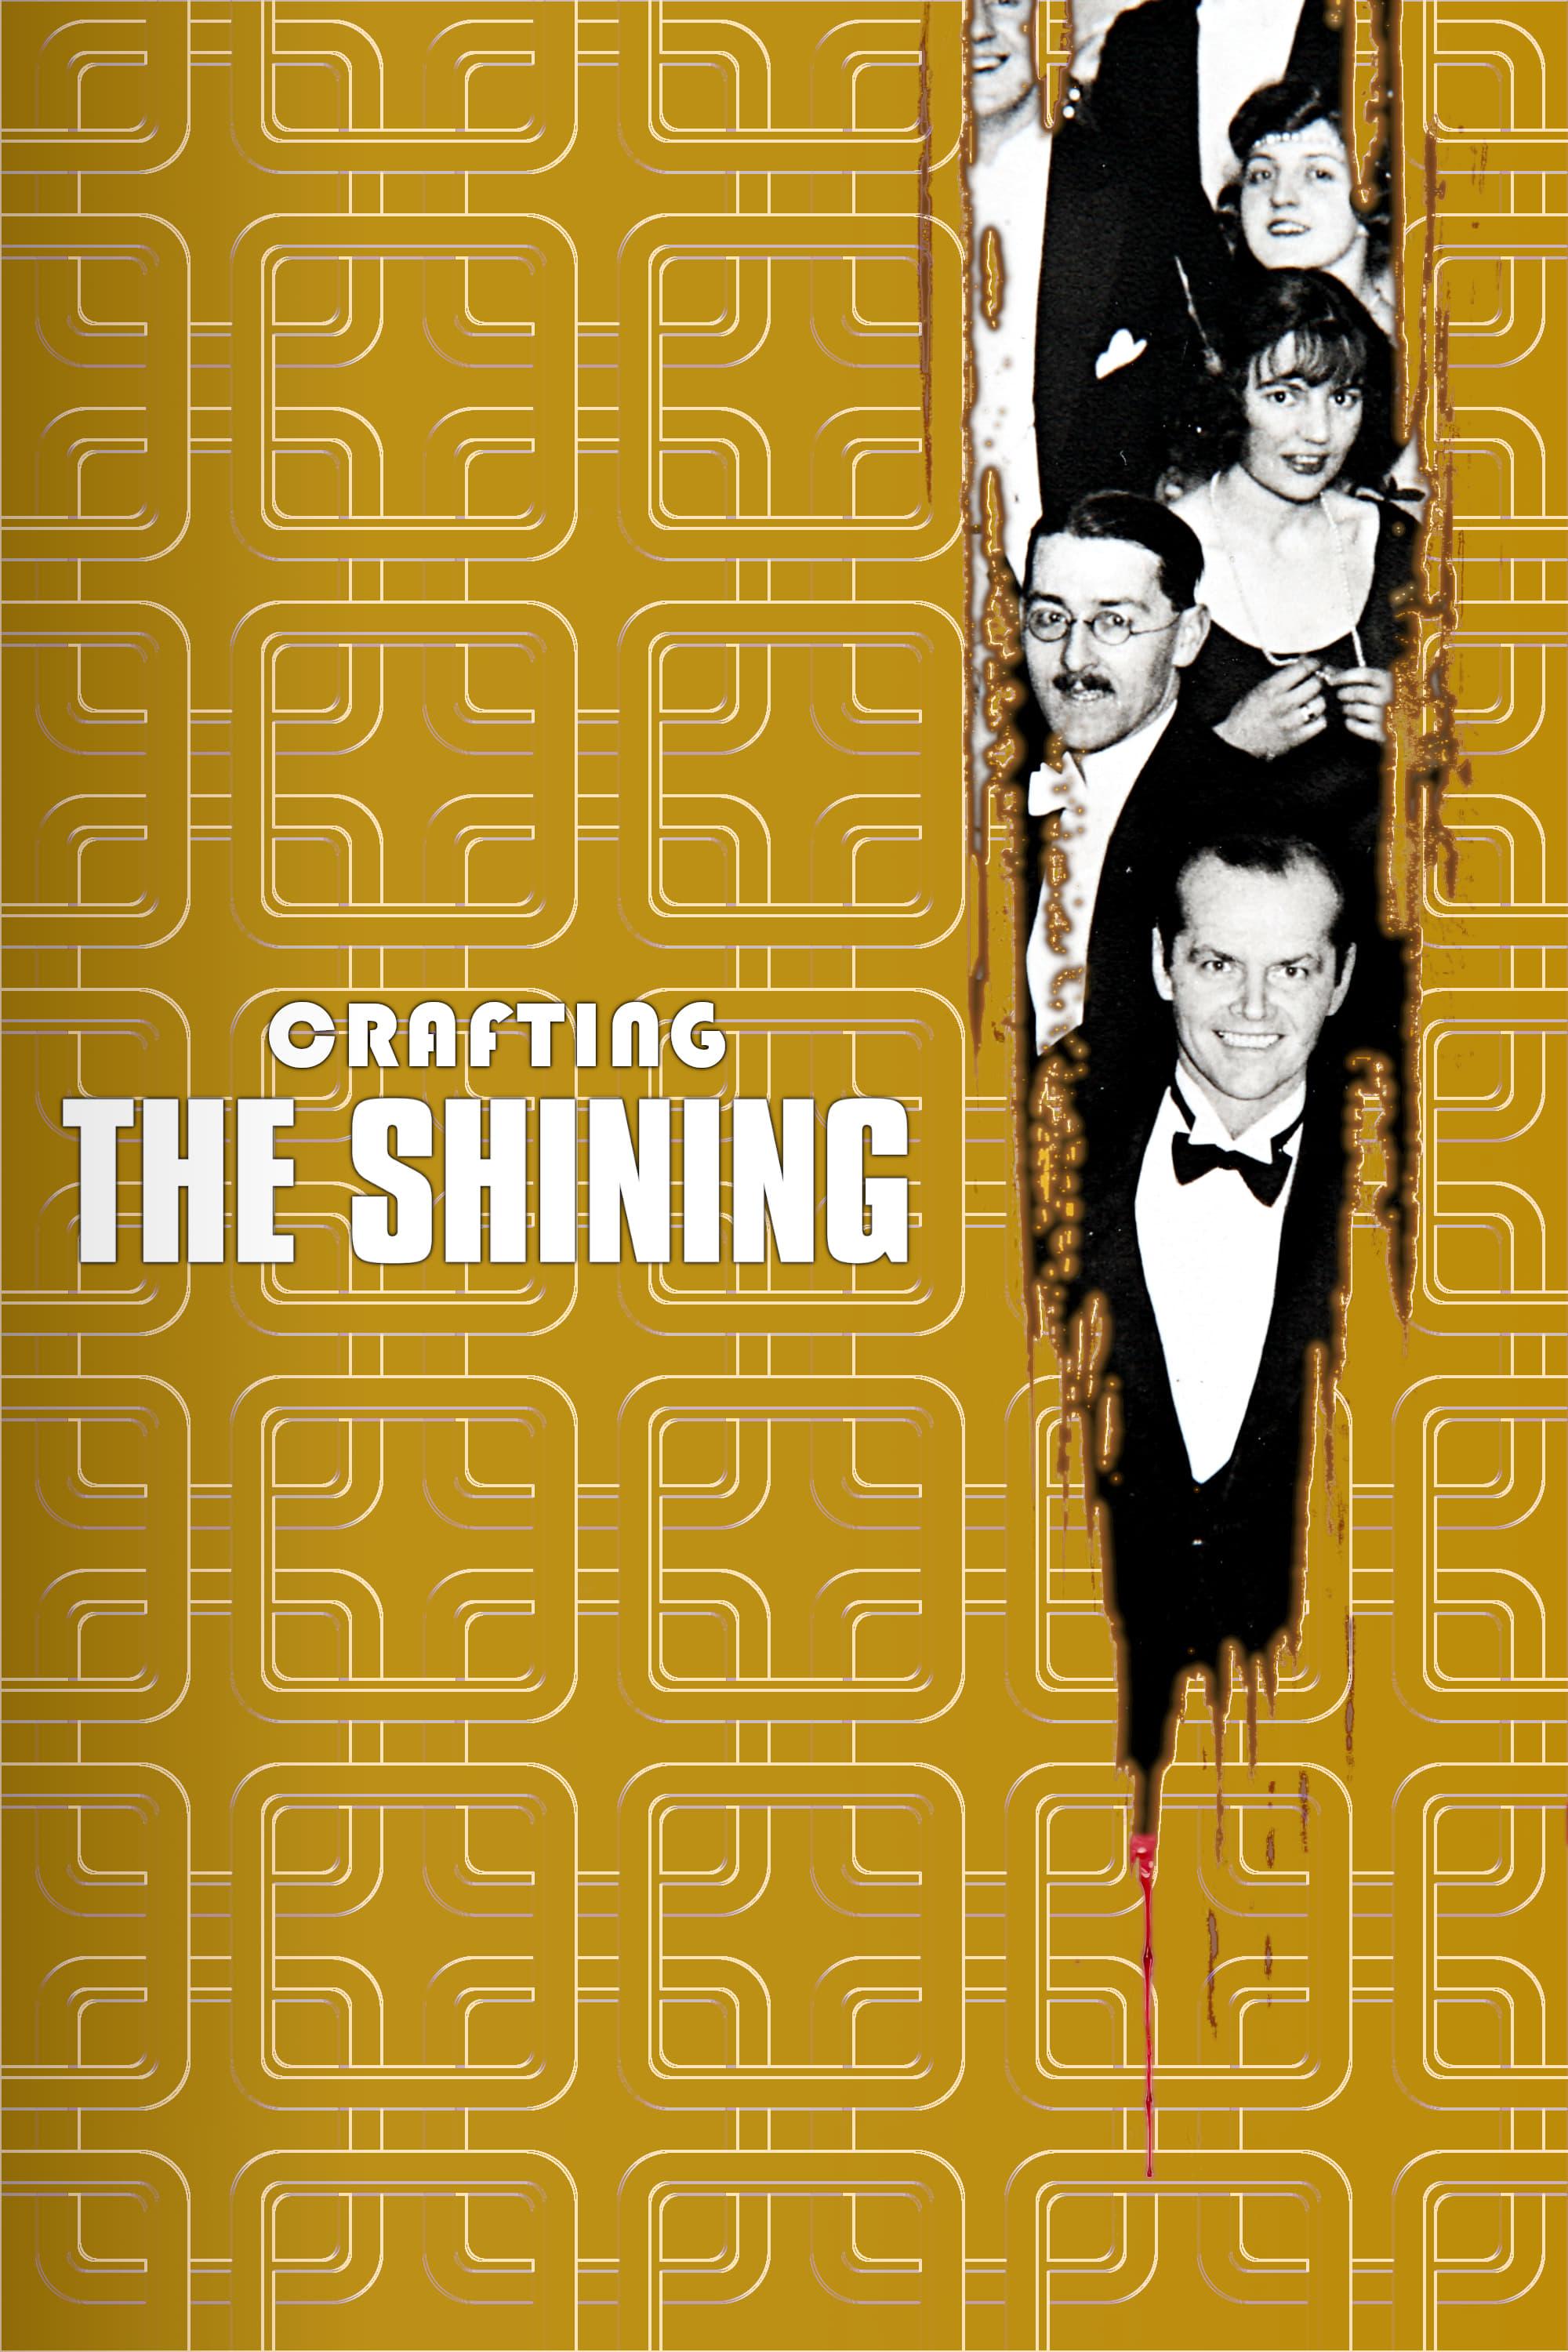 View from the Overlook: Crafting 'The Shining' poster